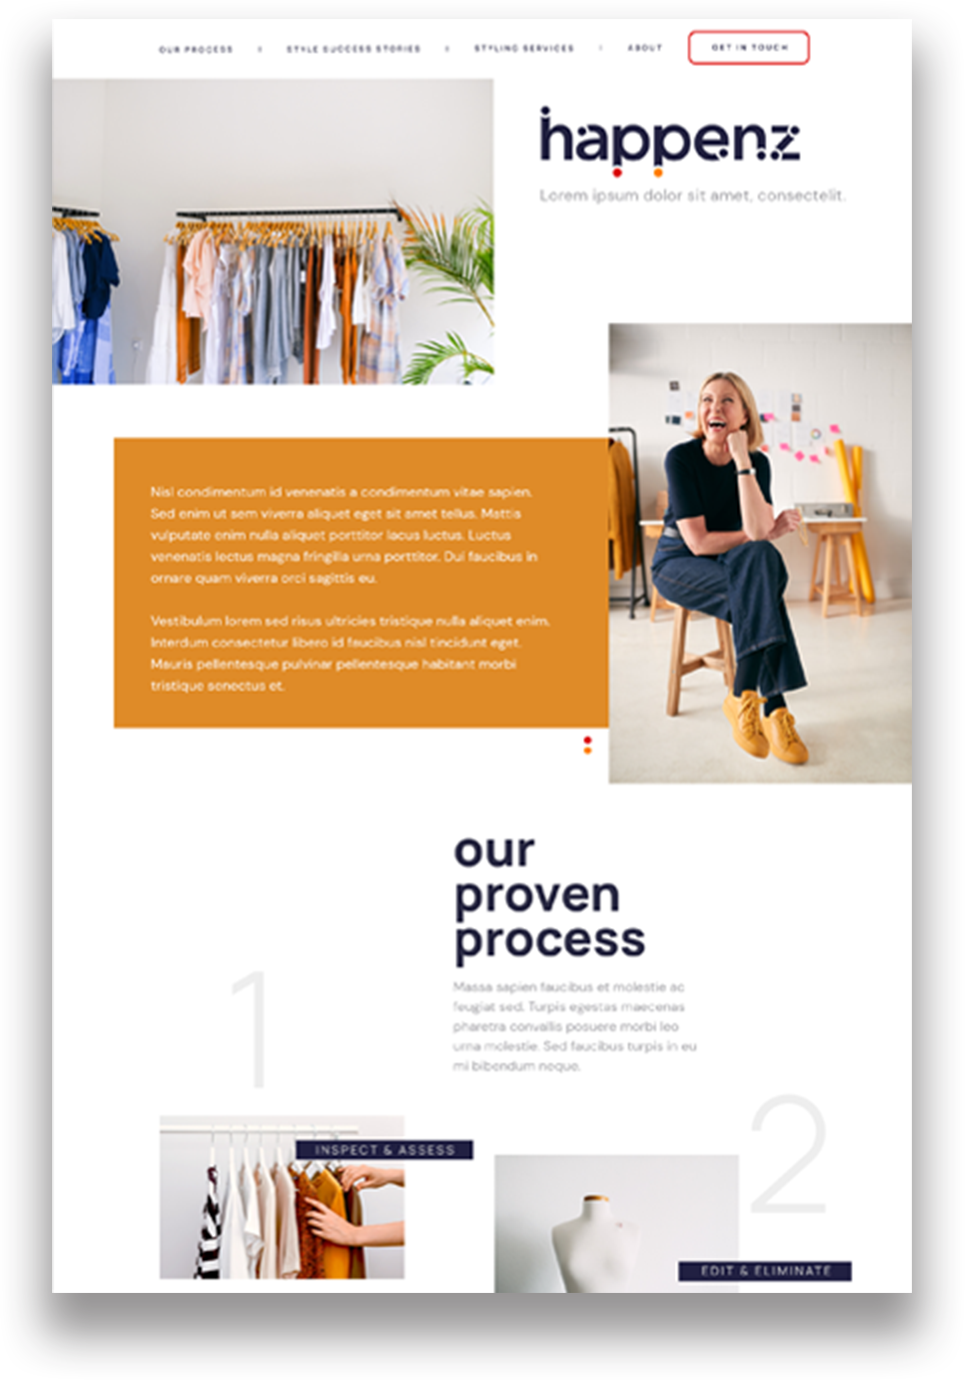 Small business one page WordPress website